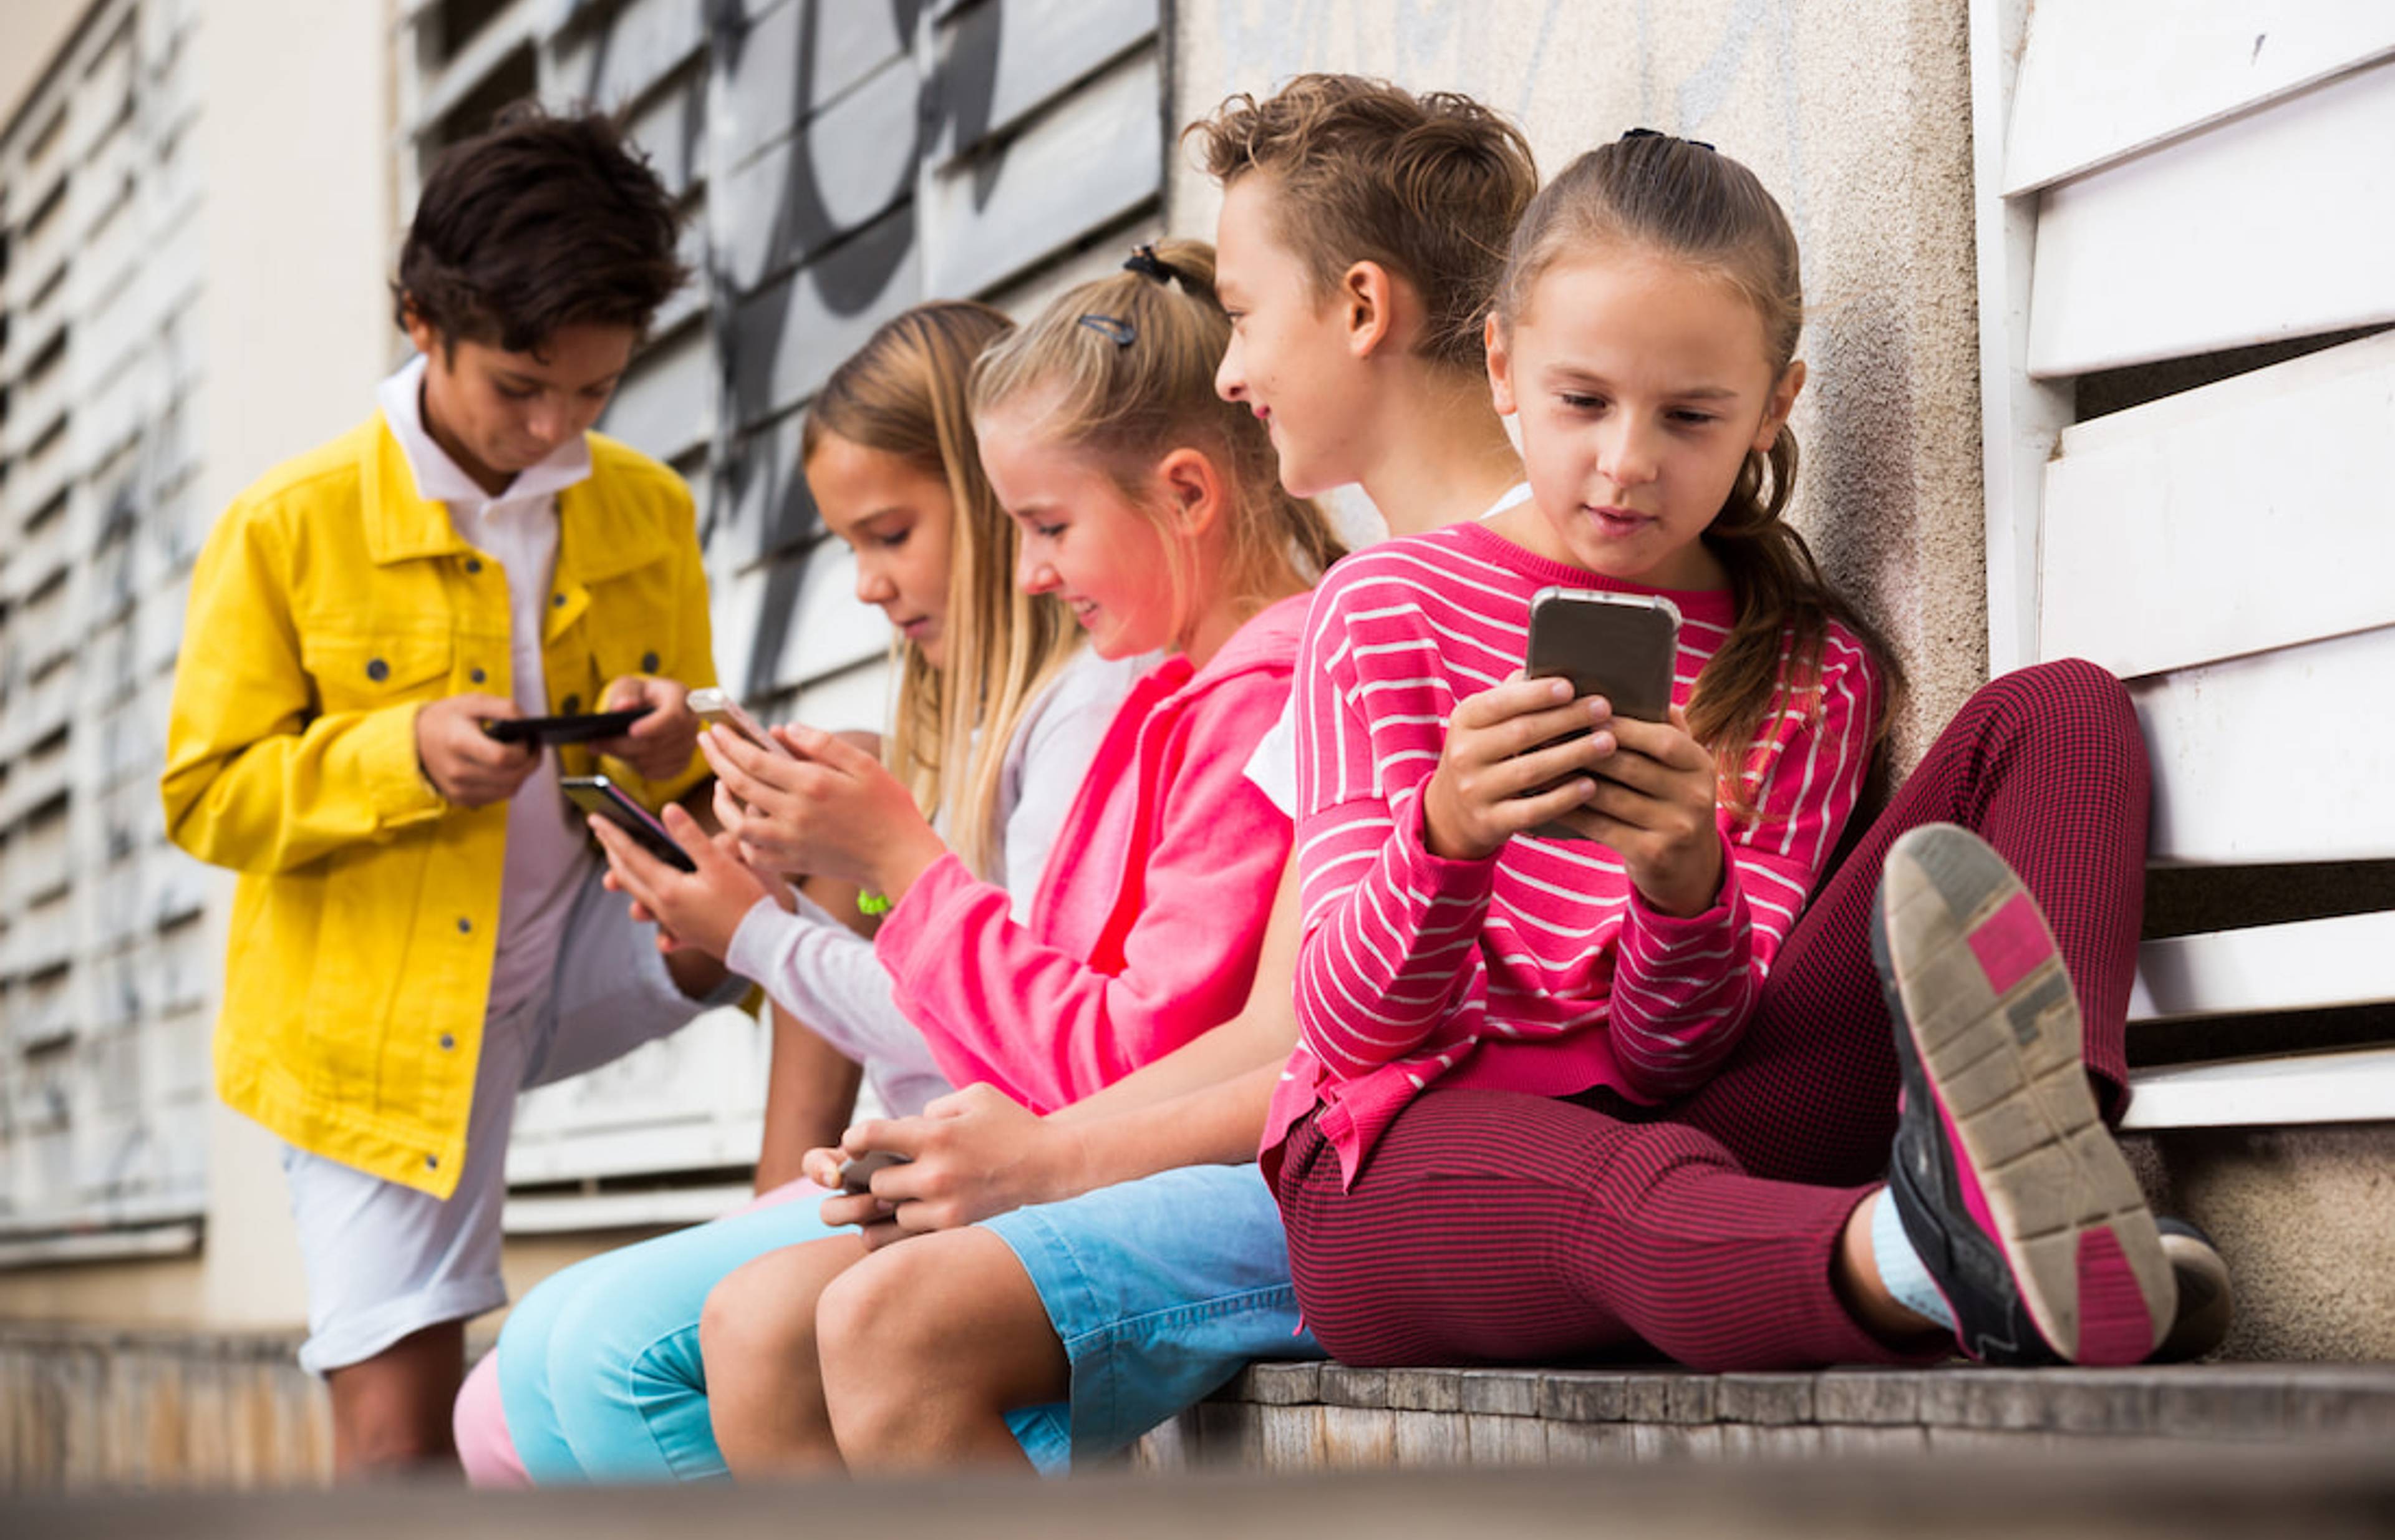 Buying Your Child a Phone: Things for Parents to Consider